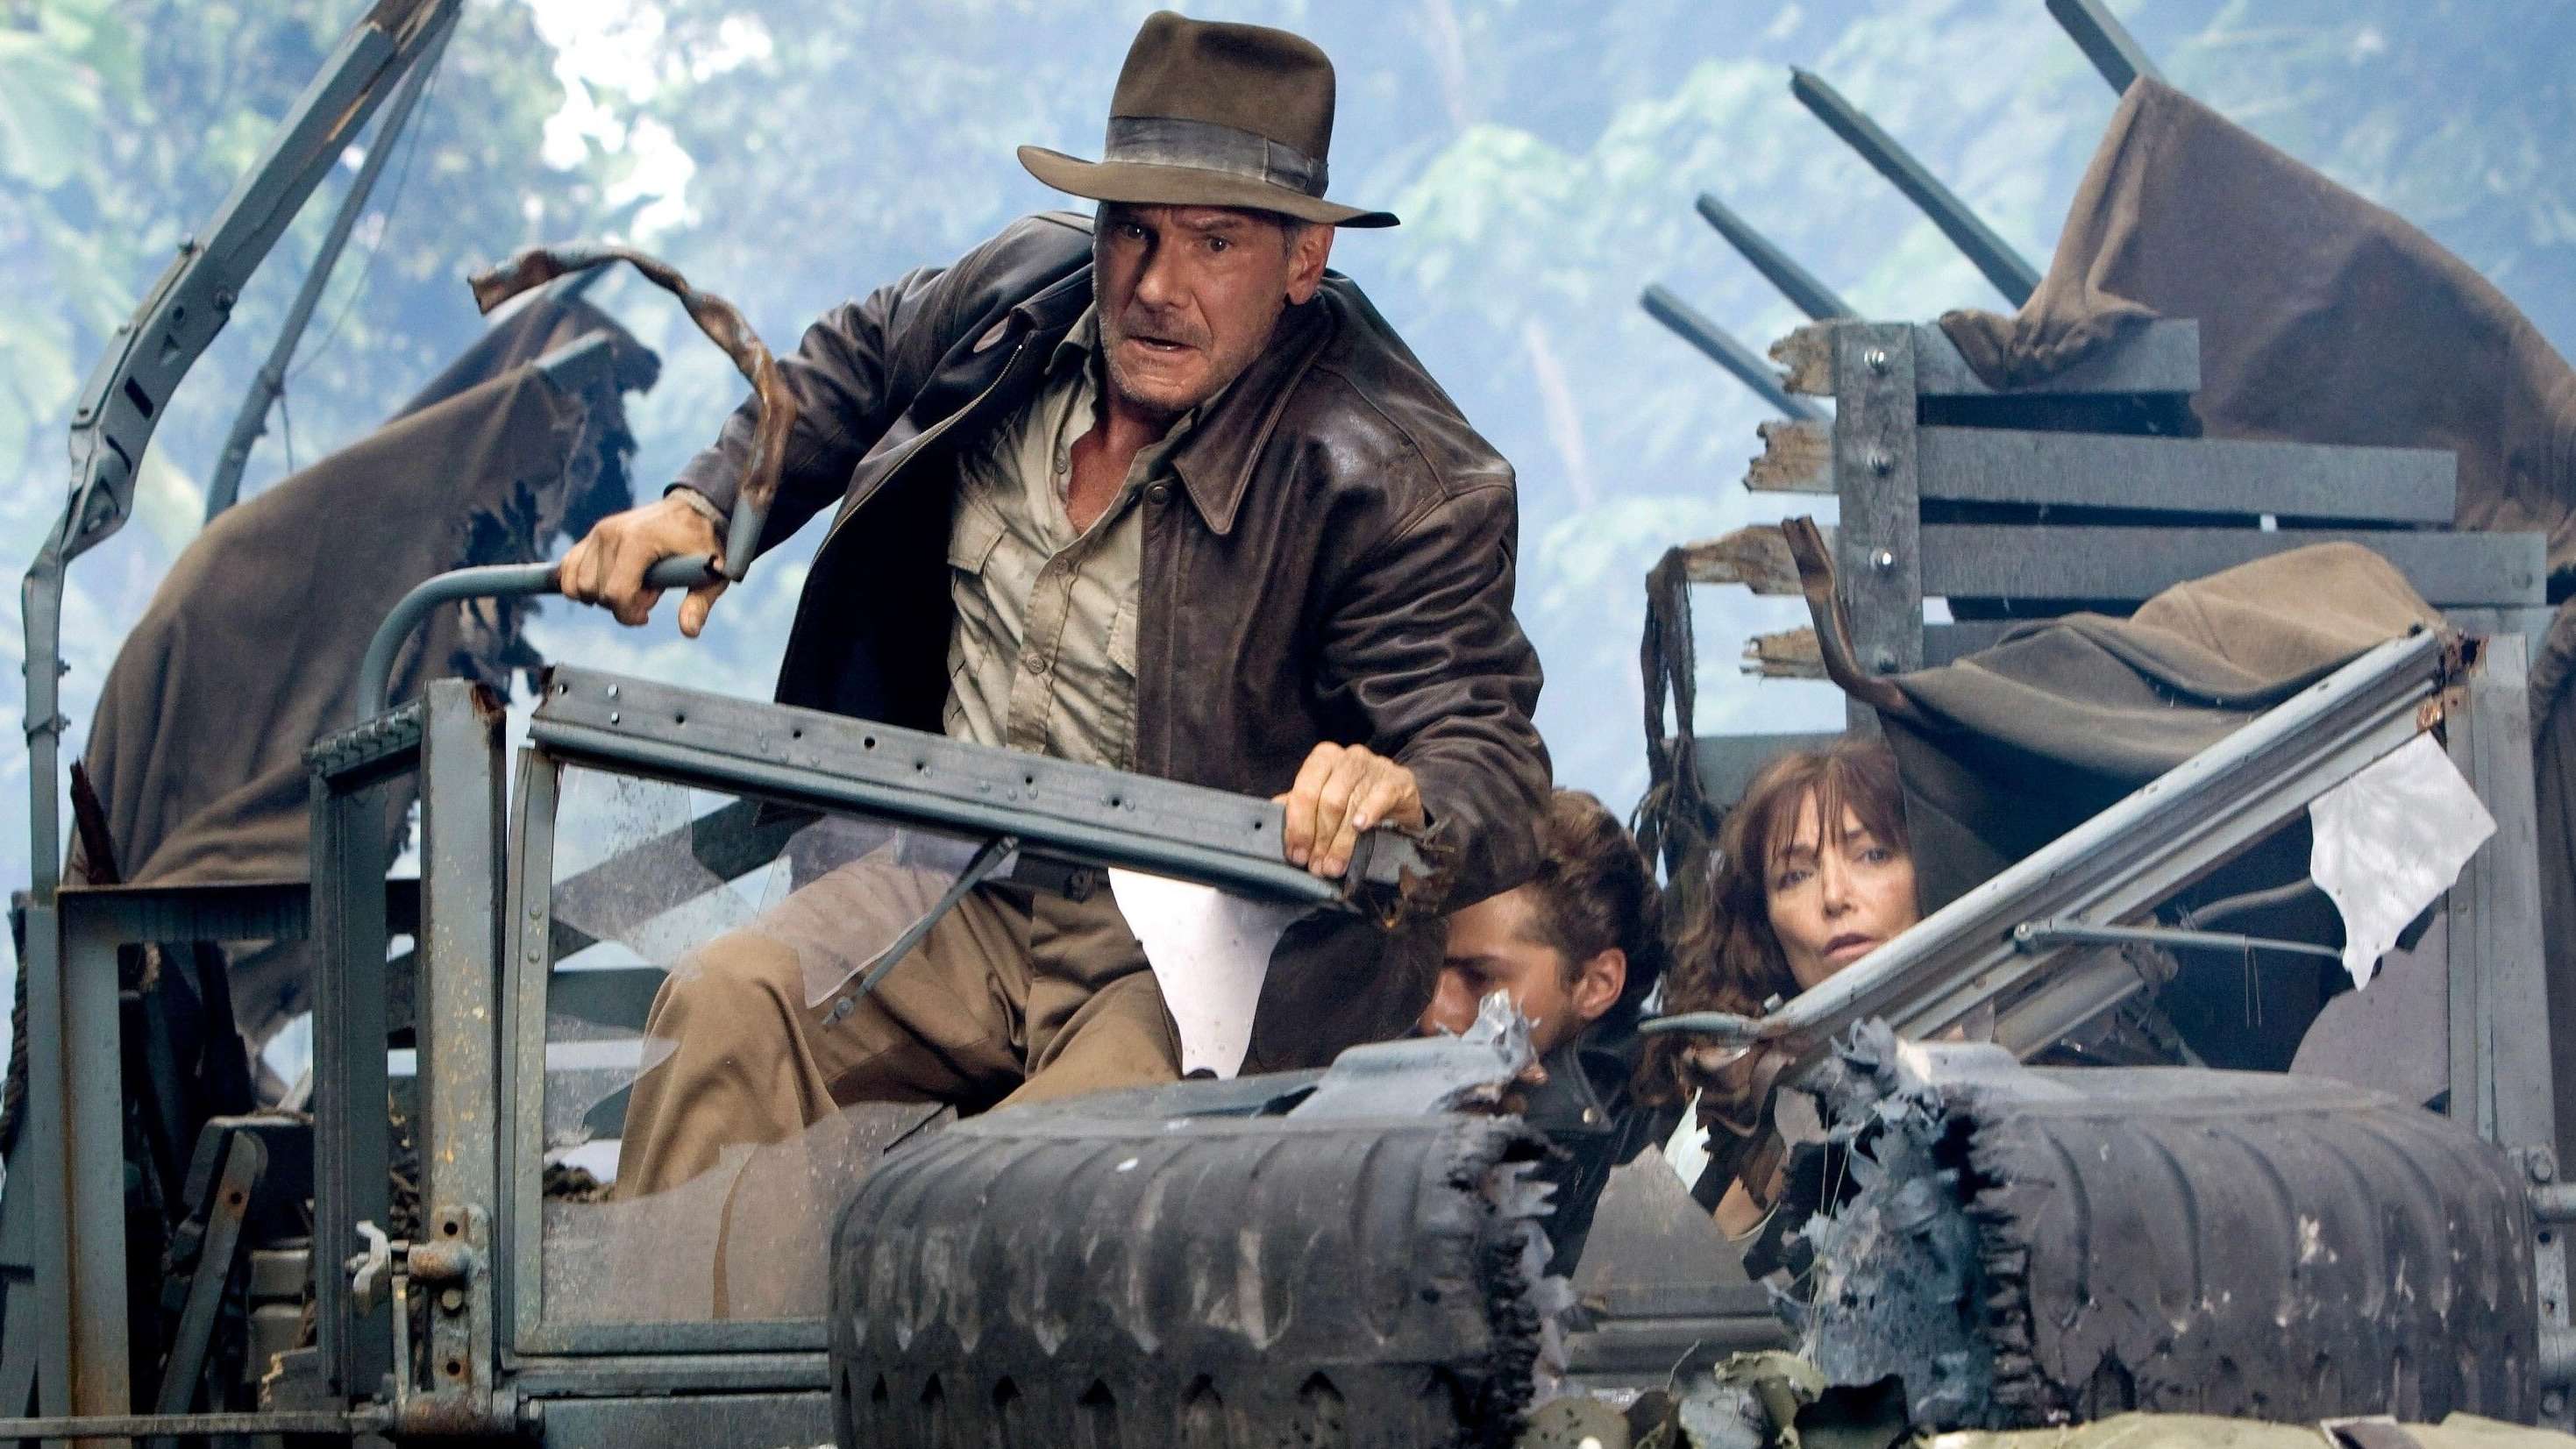 Harrison Ford in Indiana Jones and the Kingdom of the Crystal Skull.